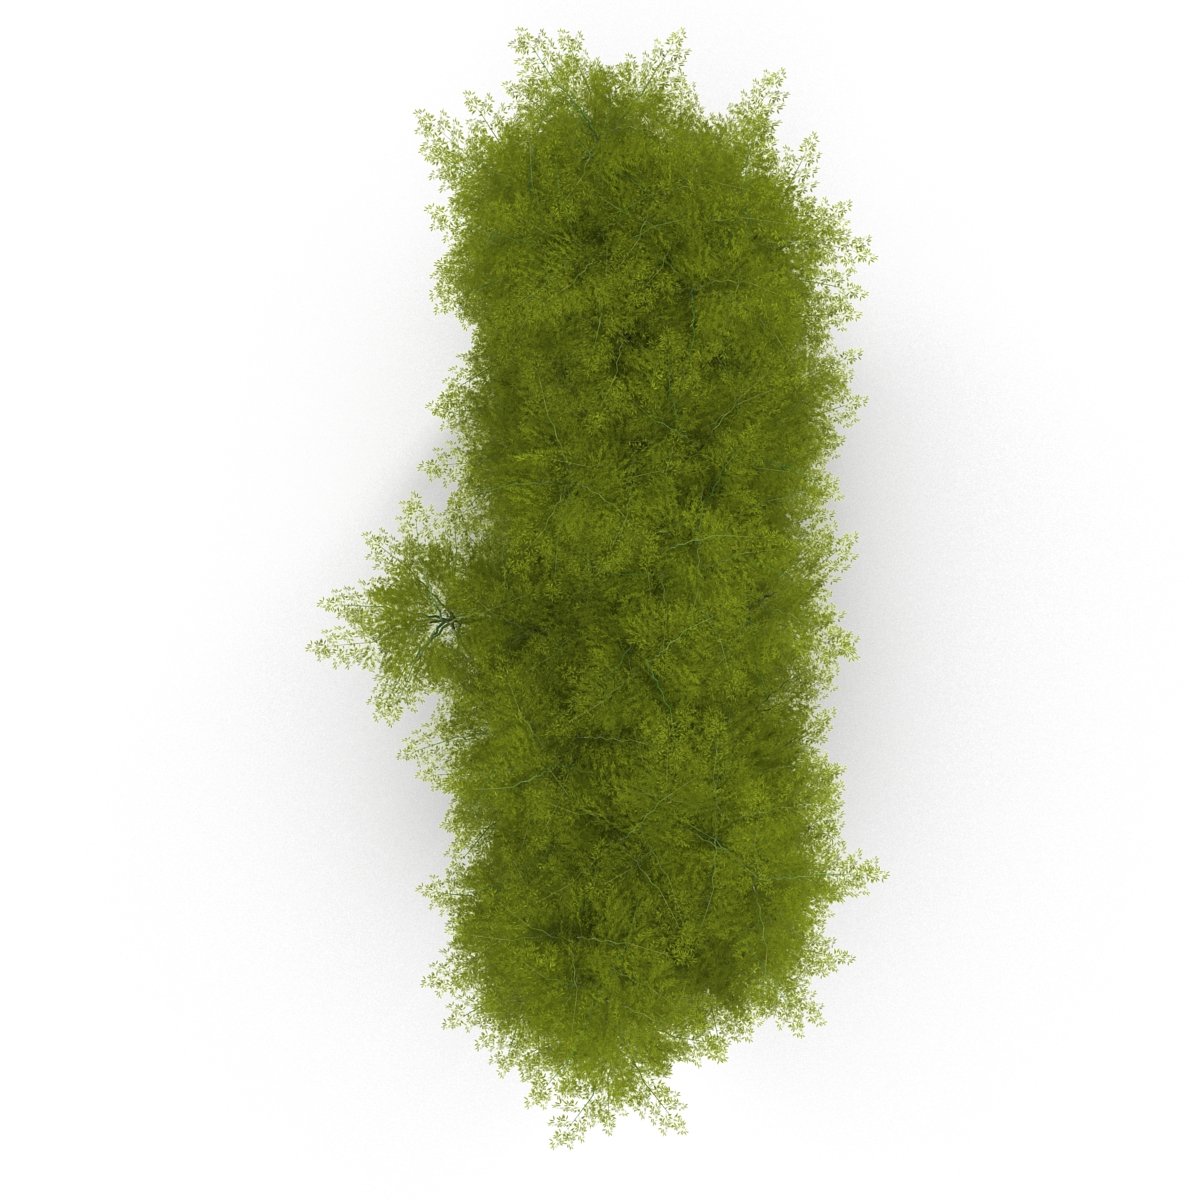 Green tree is shown from above on a white background.